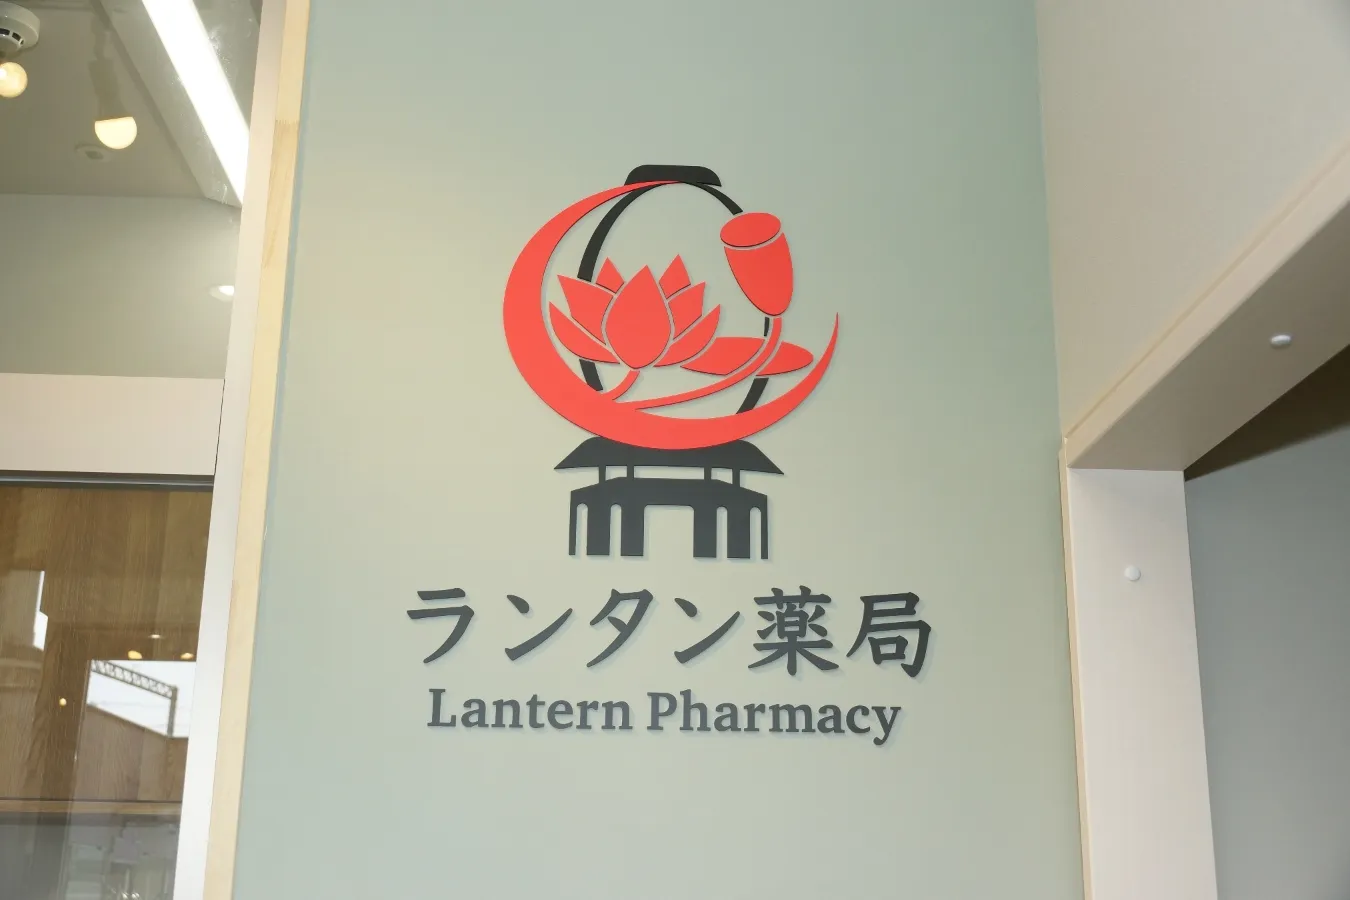 A logo object installed on the reception wall of Lantern Pharmacy